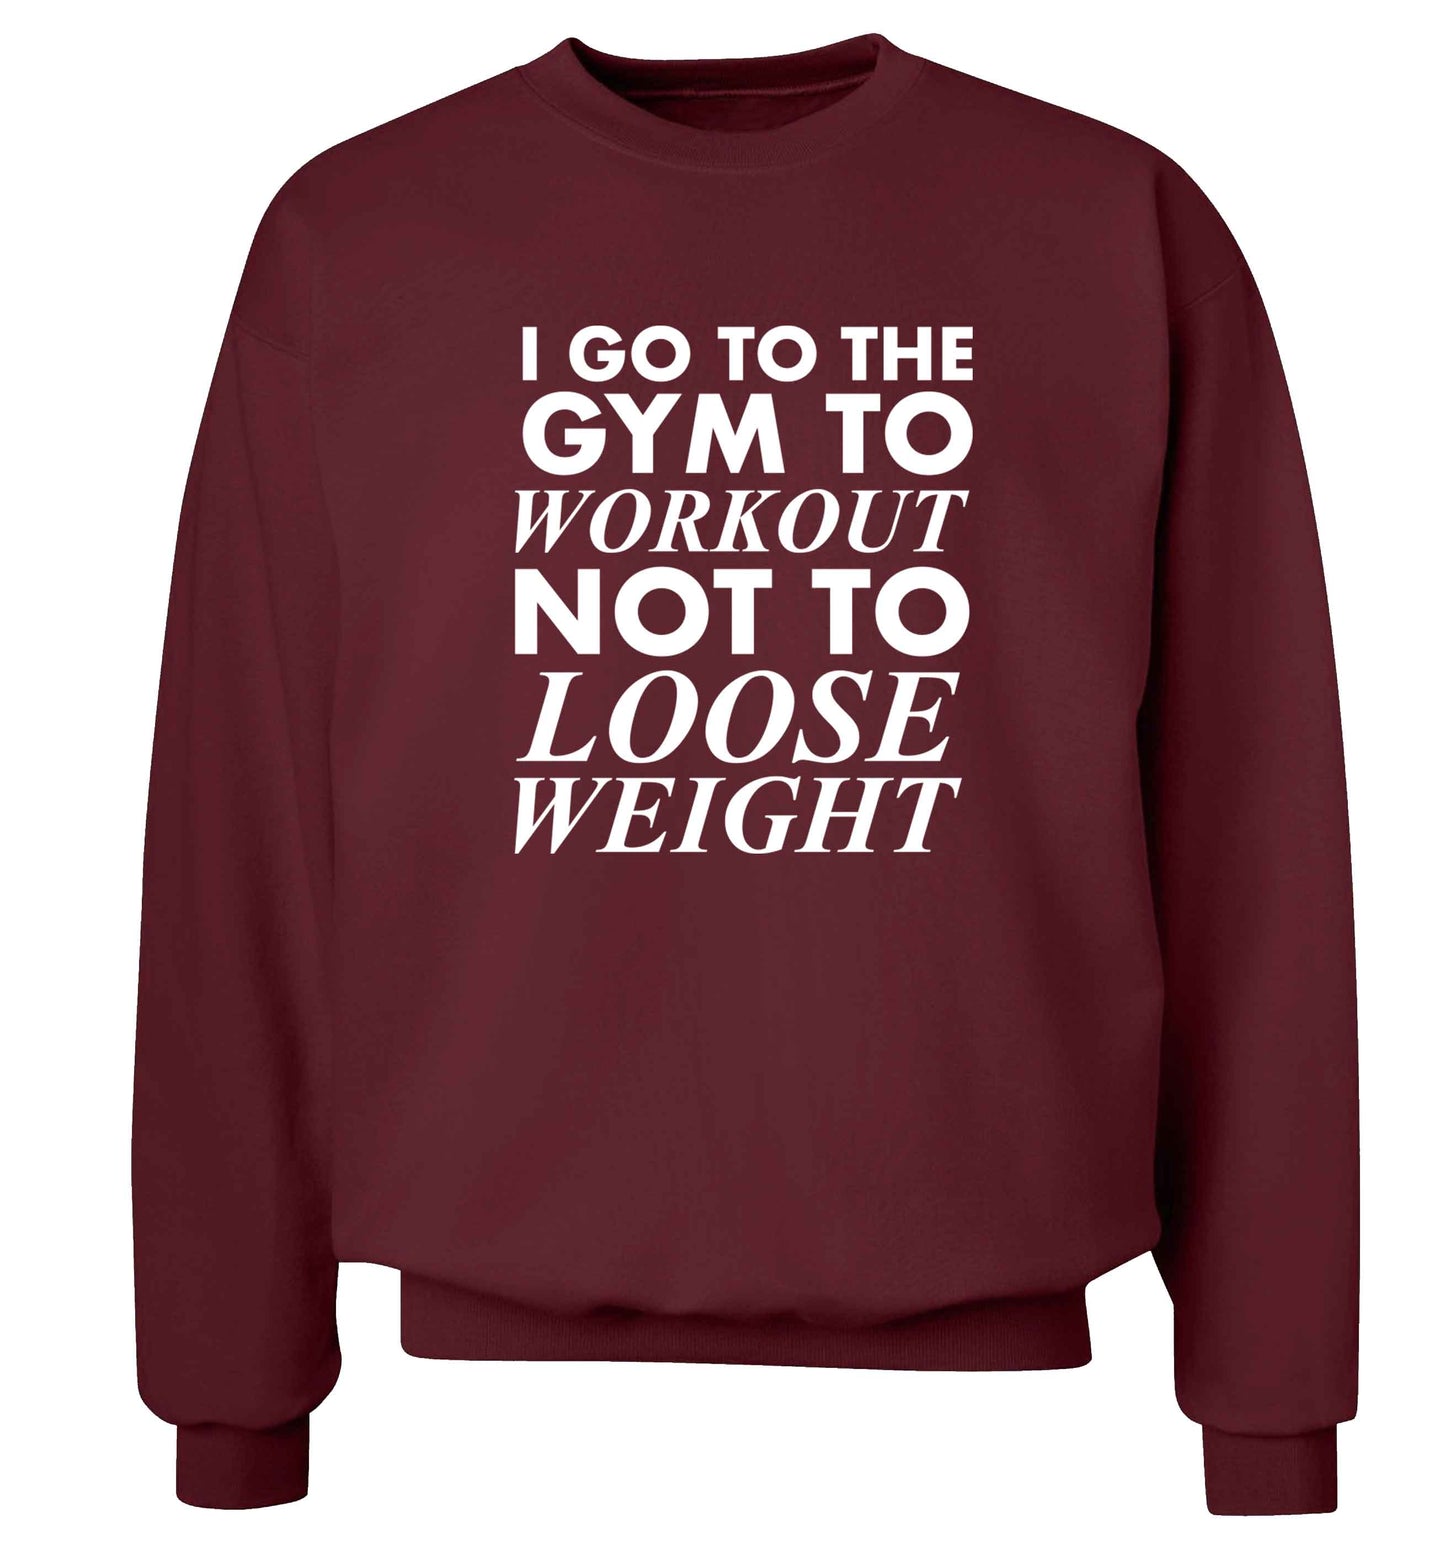 I go to the gym to workout not to loose weight adult's unisex maroon sweater 2XL